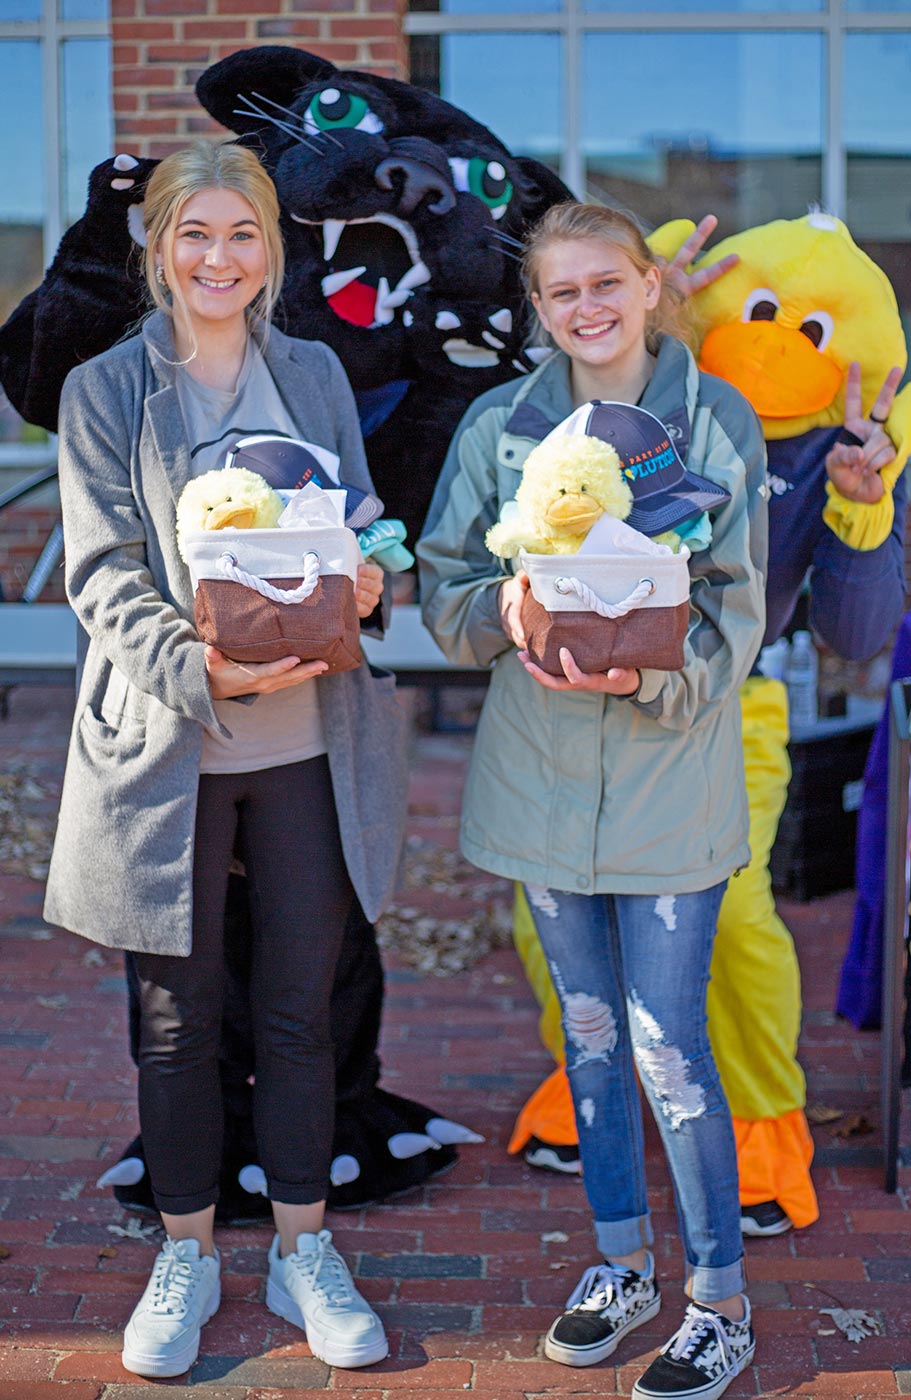 two young ladies smile holding baskets filled with ChooseLove merchandise